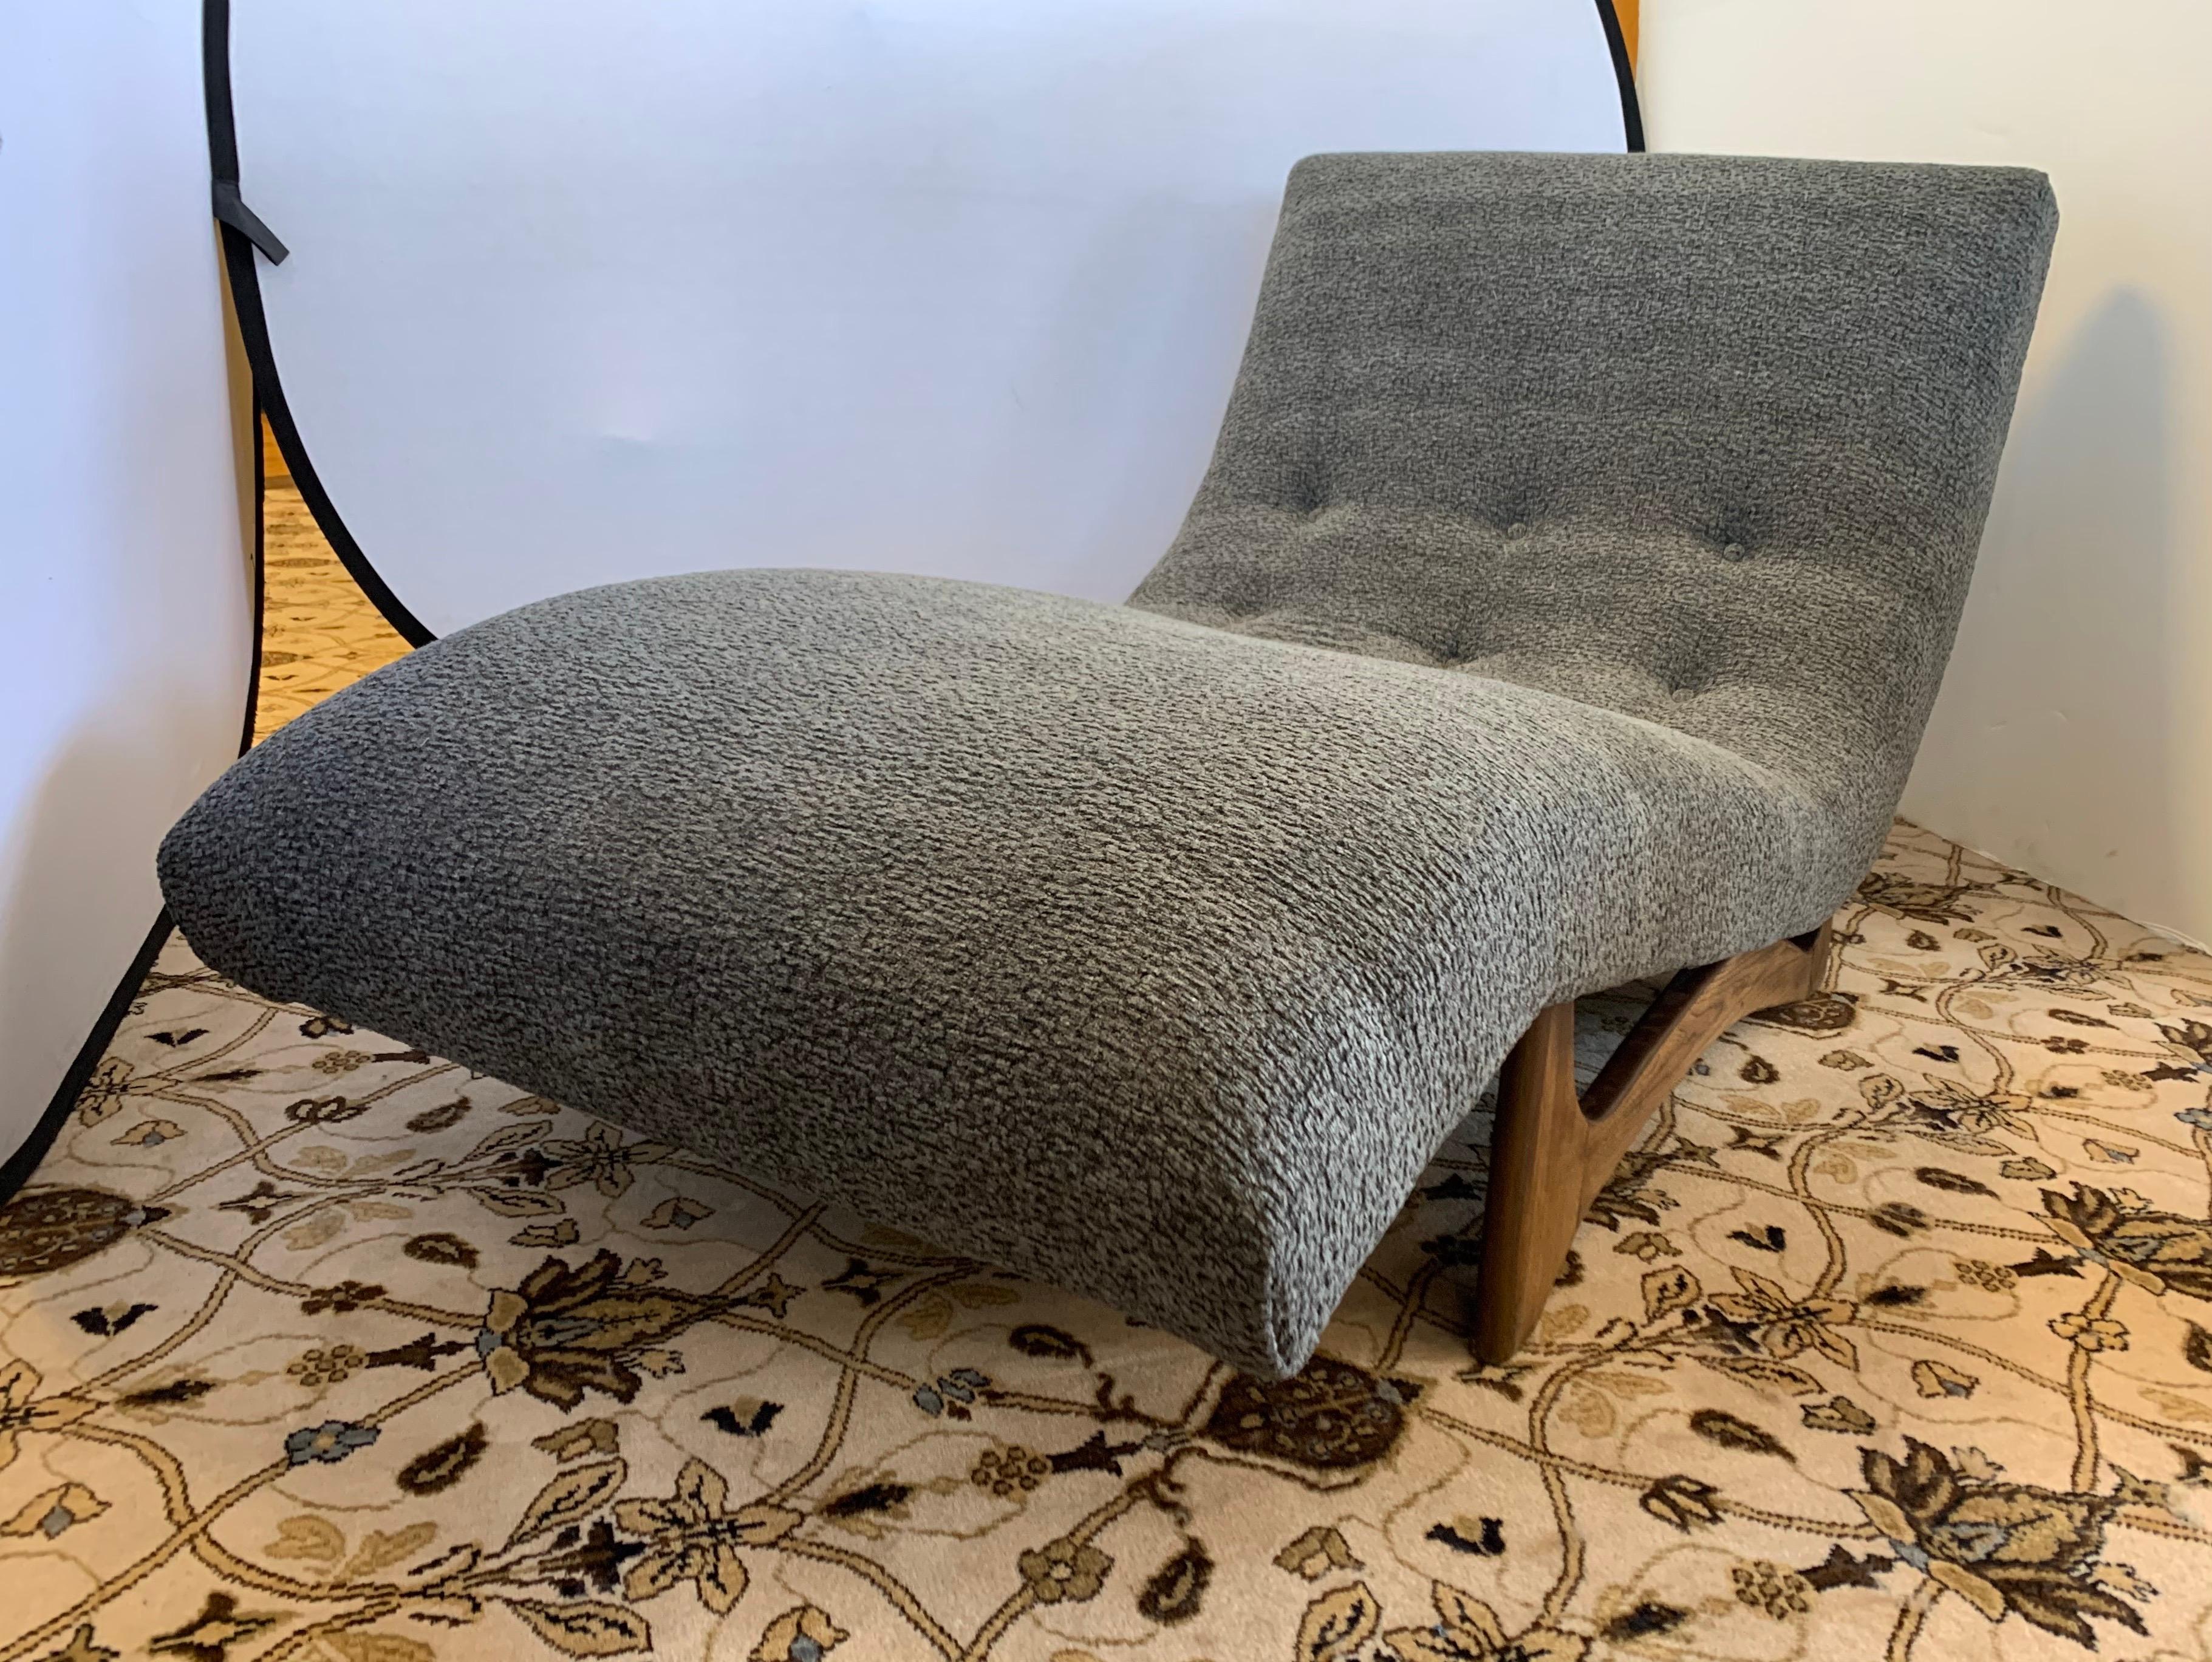 A magnificent Adrian Pearsall Wave chaise longue sofa that has been newly reupholstered in a Donghia Boucle fabric with a one of a kind color of gray and silver weave. Iconic Adrian Pearsall seating is some of the most sought after pieces in the mid